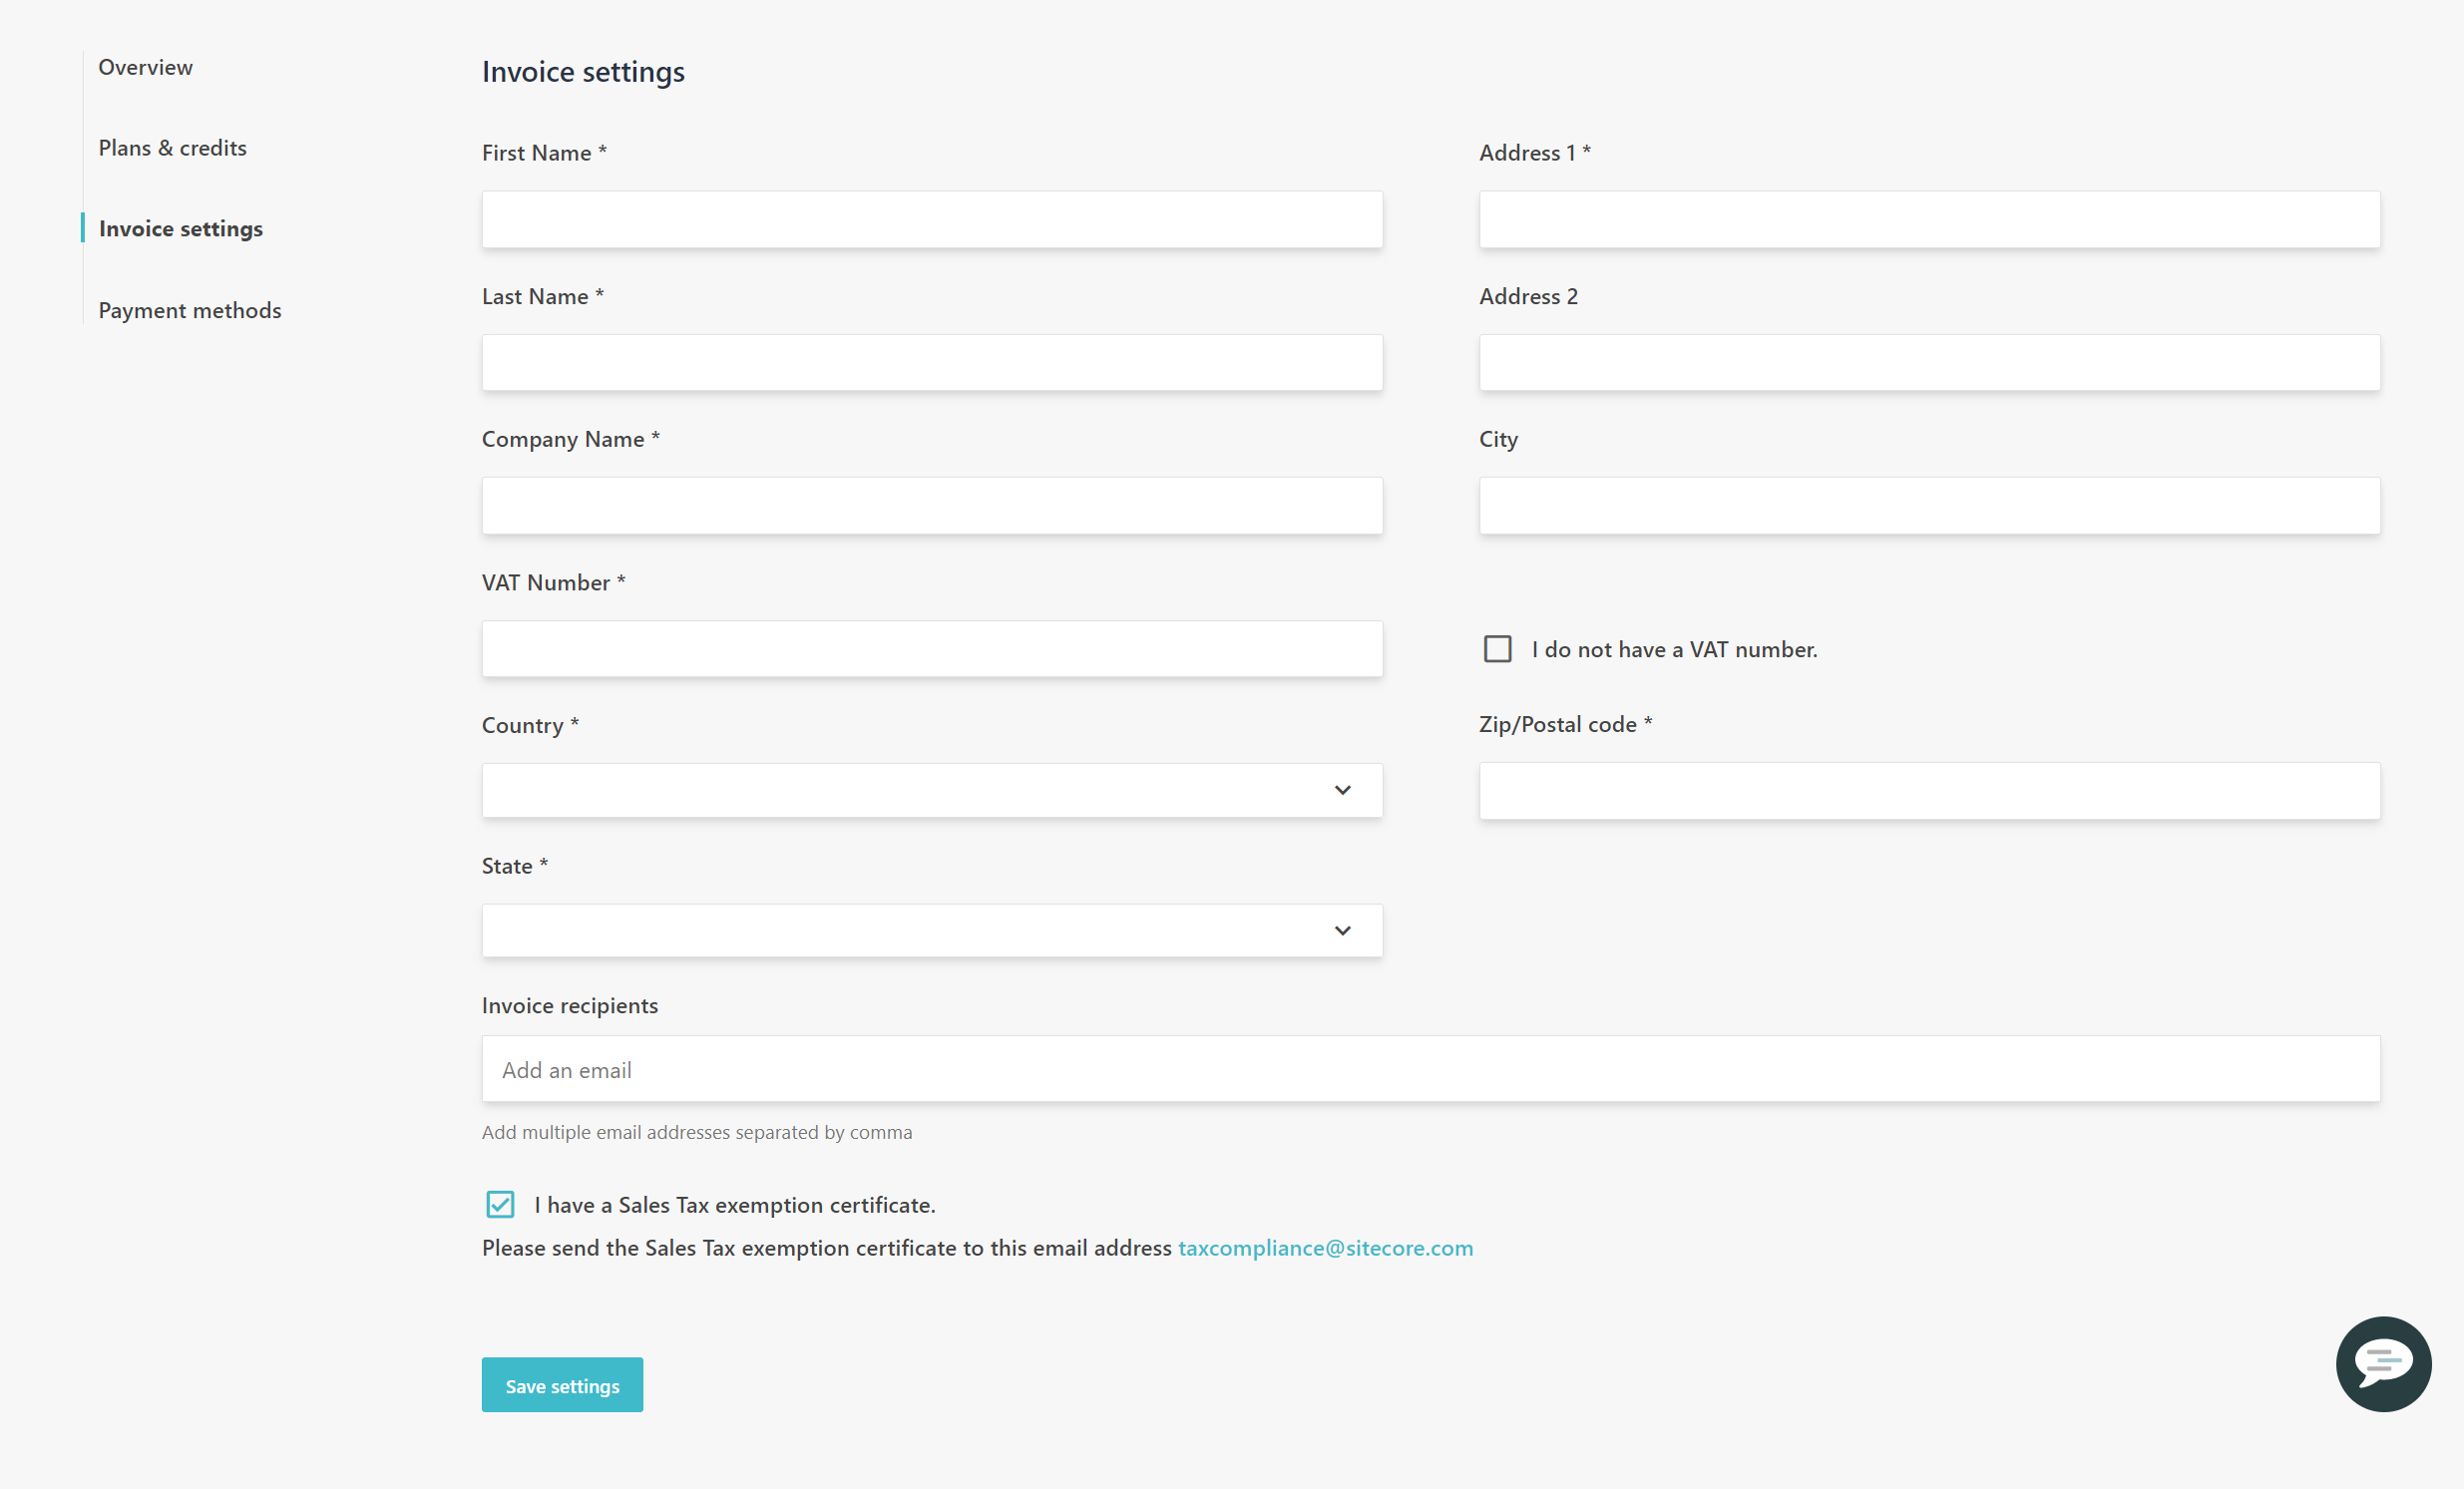 The Invoice settings page